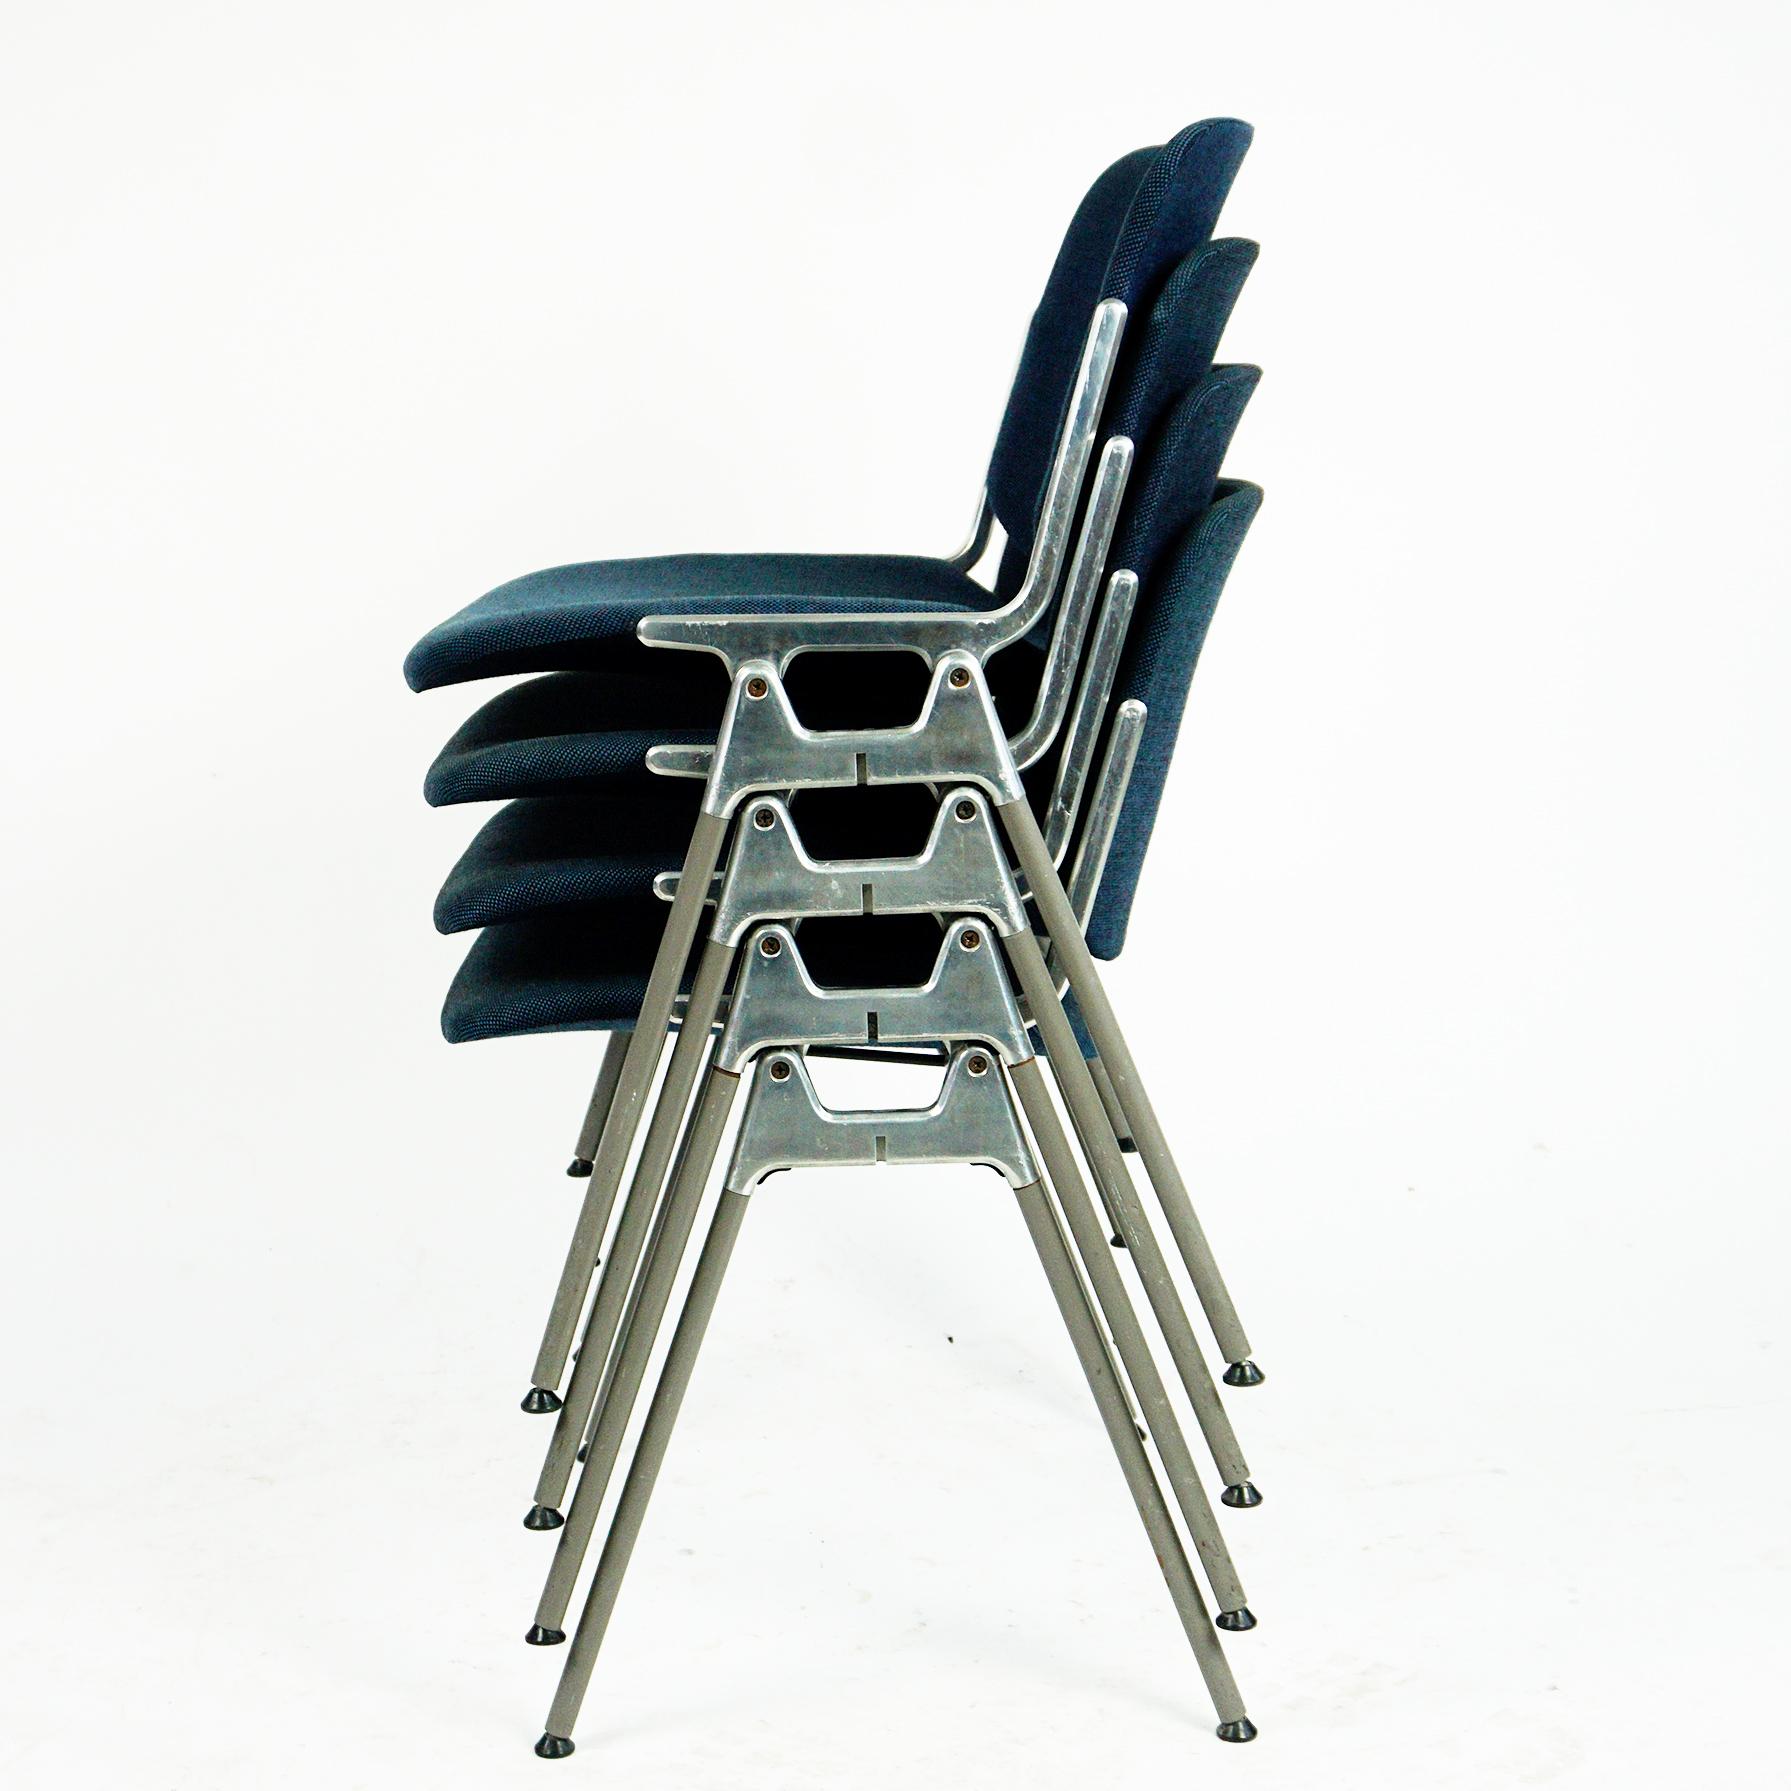 Set of four iconic Italian Modern DSC 106 stacking chairs, designed 1965 by Giancarlo Piretti for Castelli. This set features seats and backs upholstered with blue fabric in they very nice condition with only a few signs of wear due to their age.